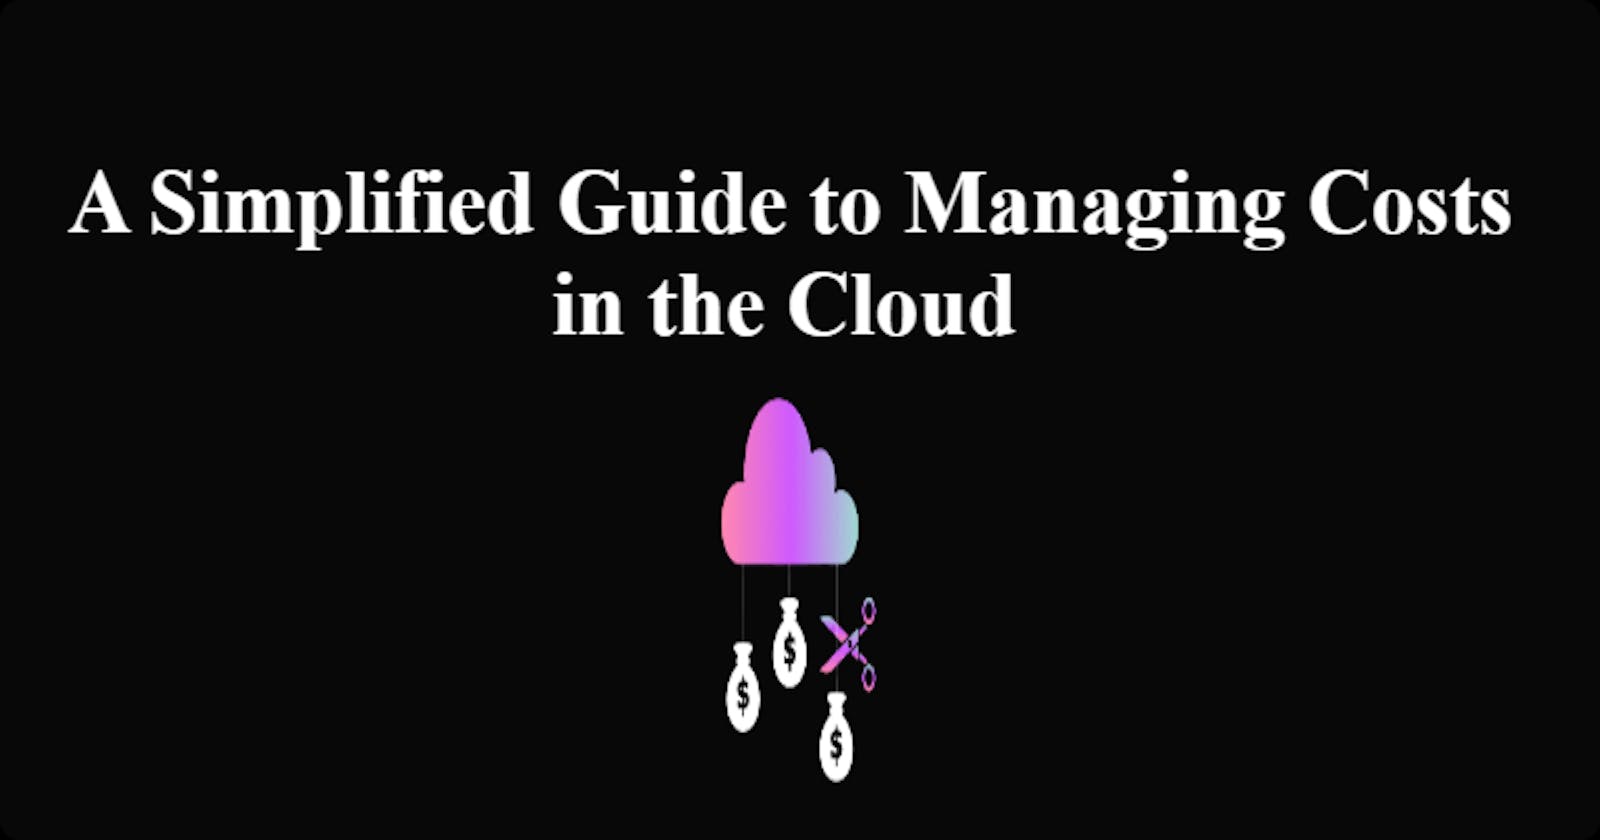 A Simplified Guide to Managing Costs in the Cloud